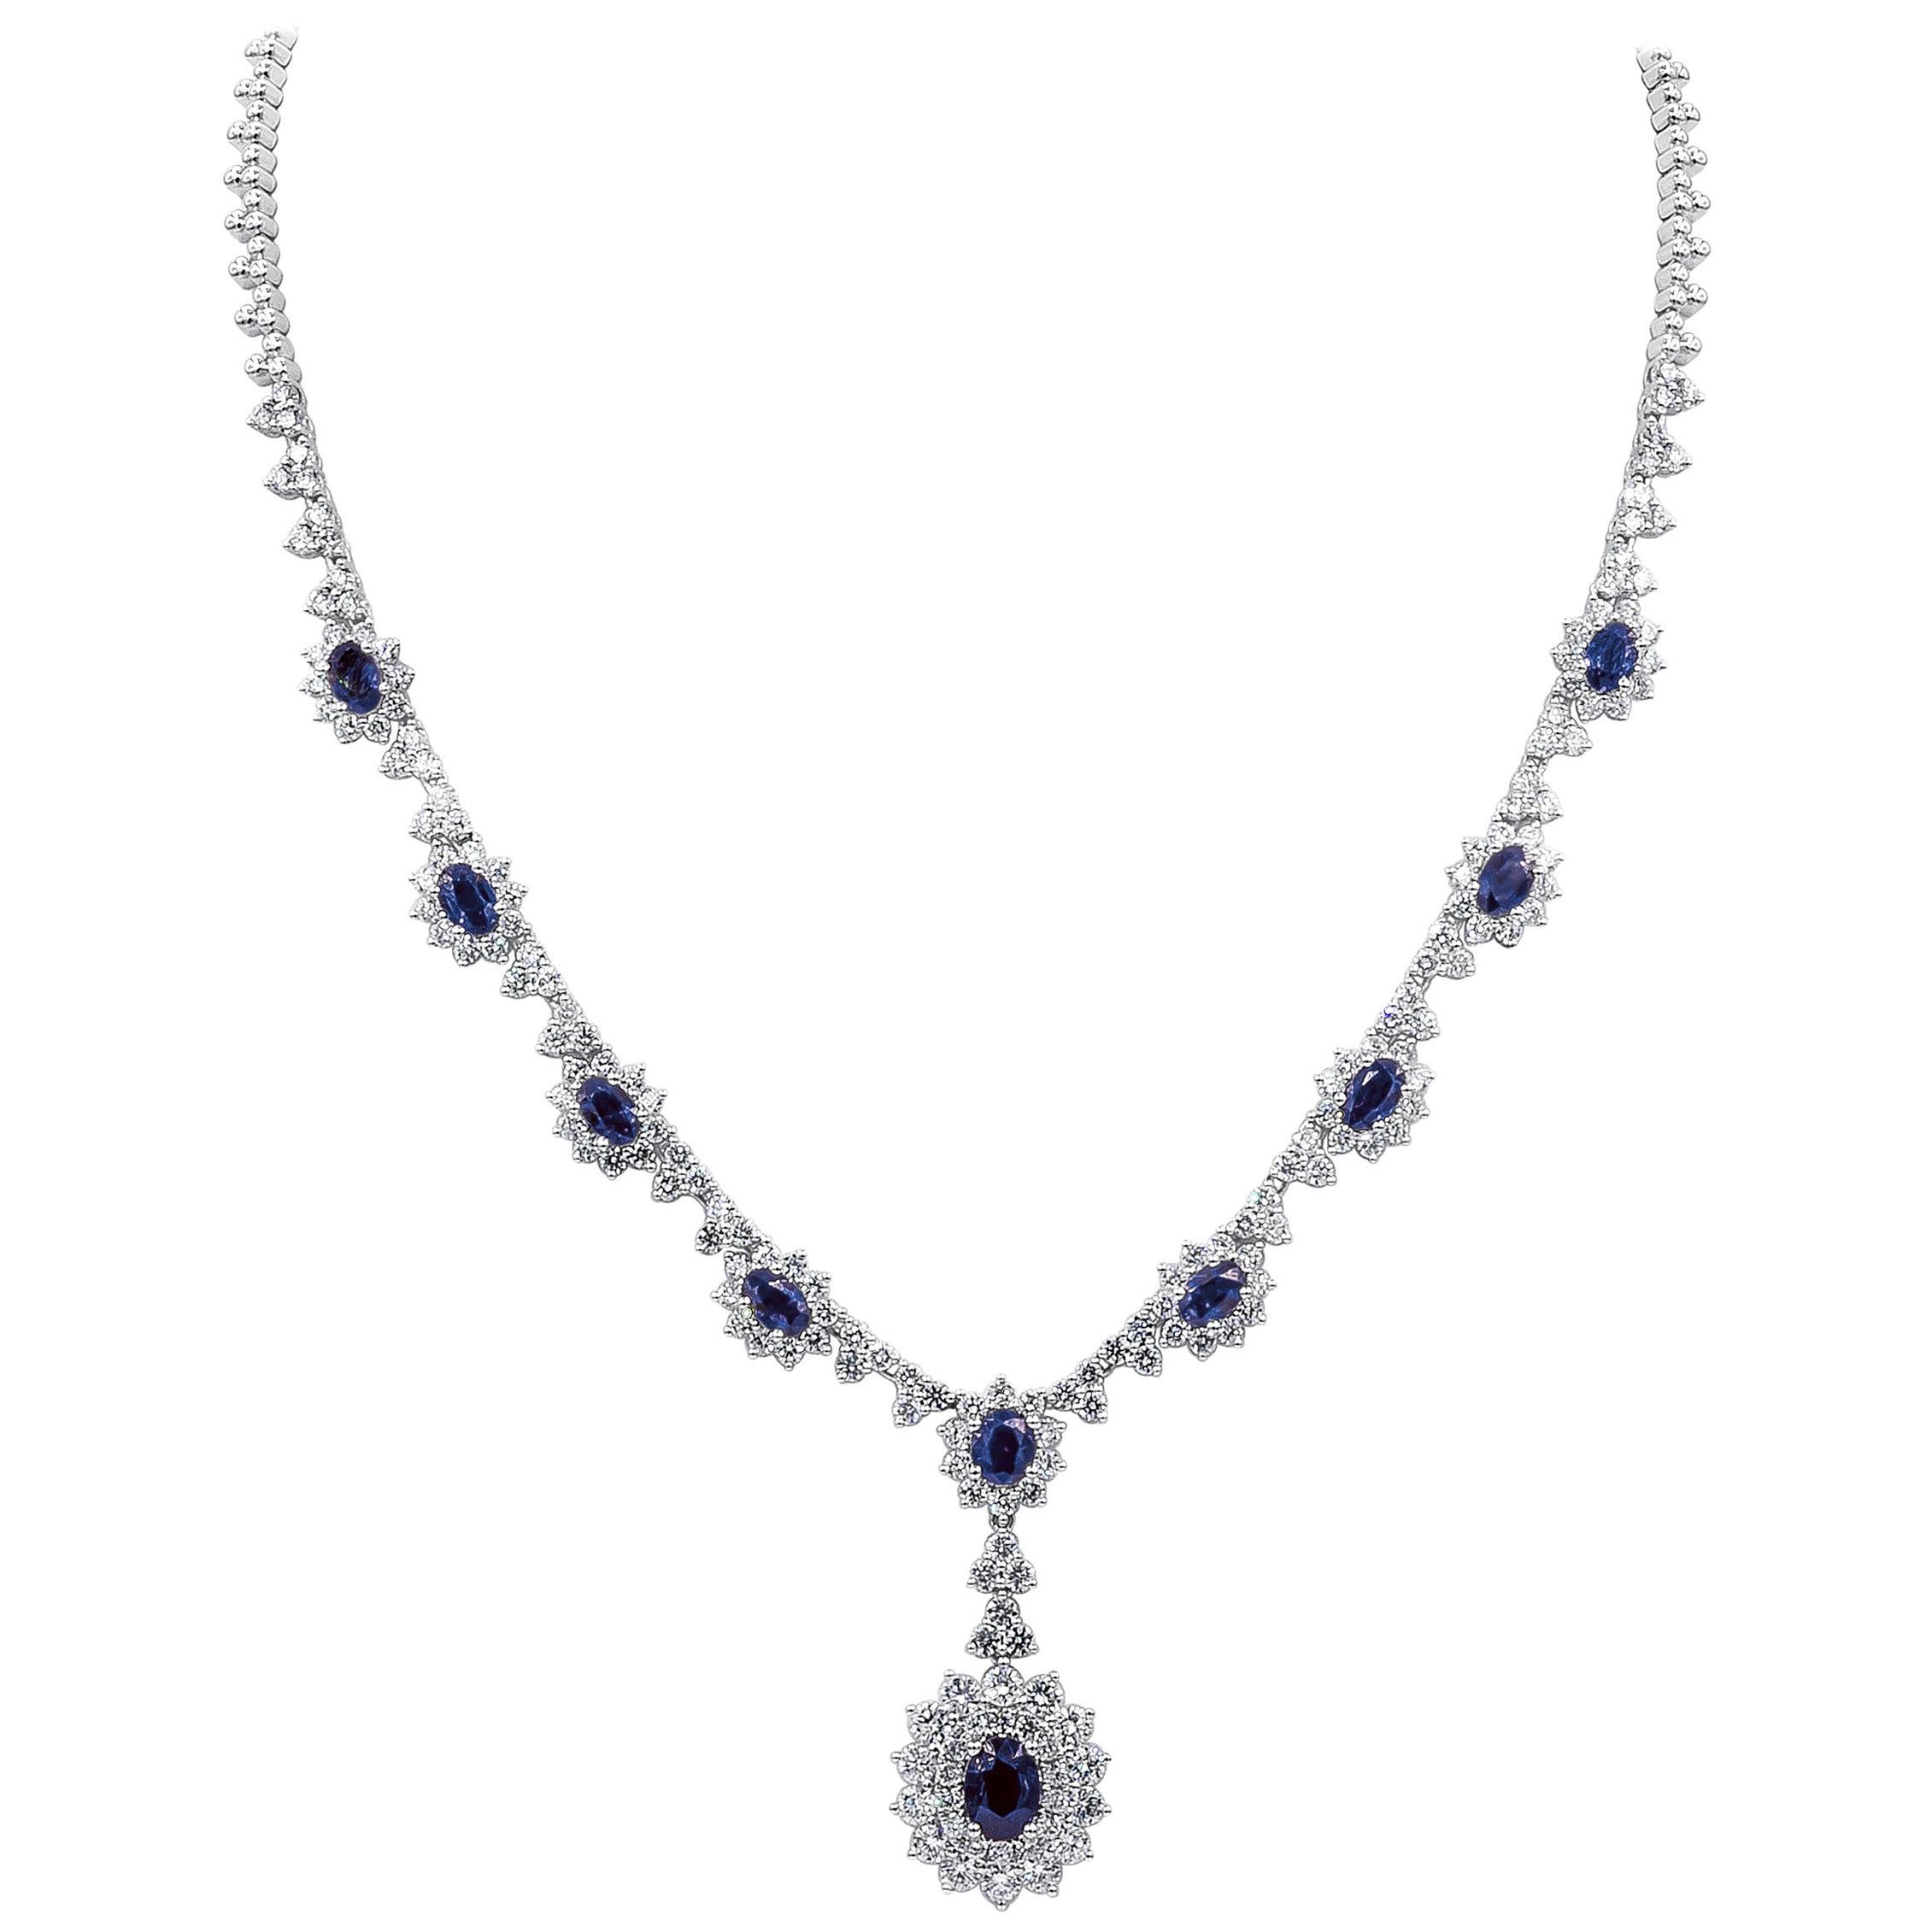 6.85 Carats Total Oval Cut Blue Sapphire and Round Diamond Halo Pendant Necklace